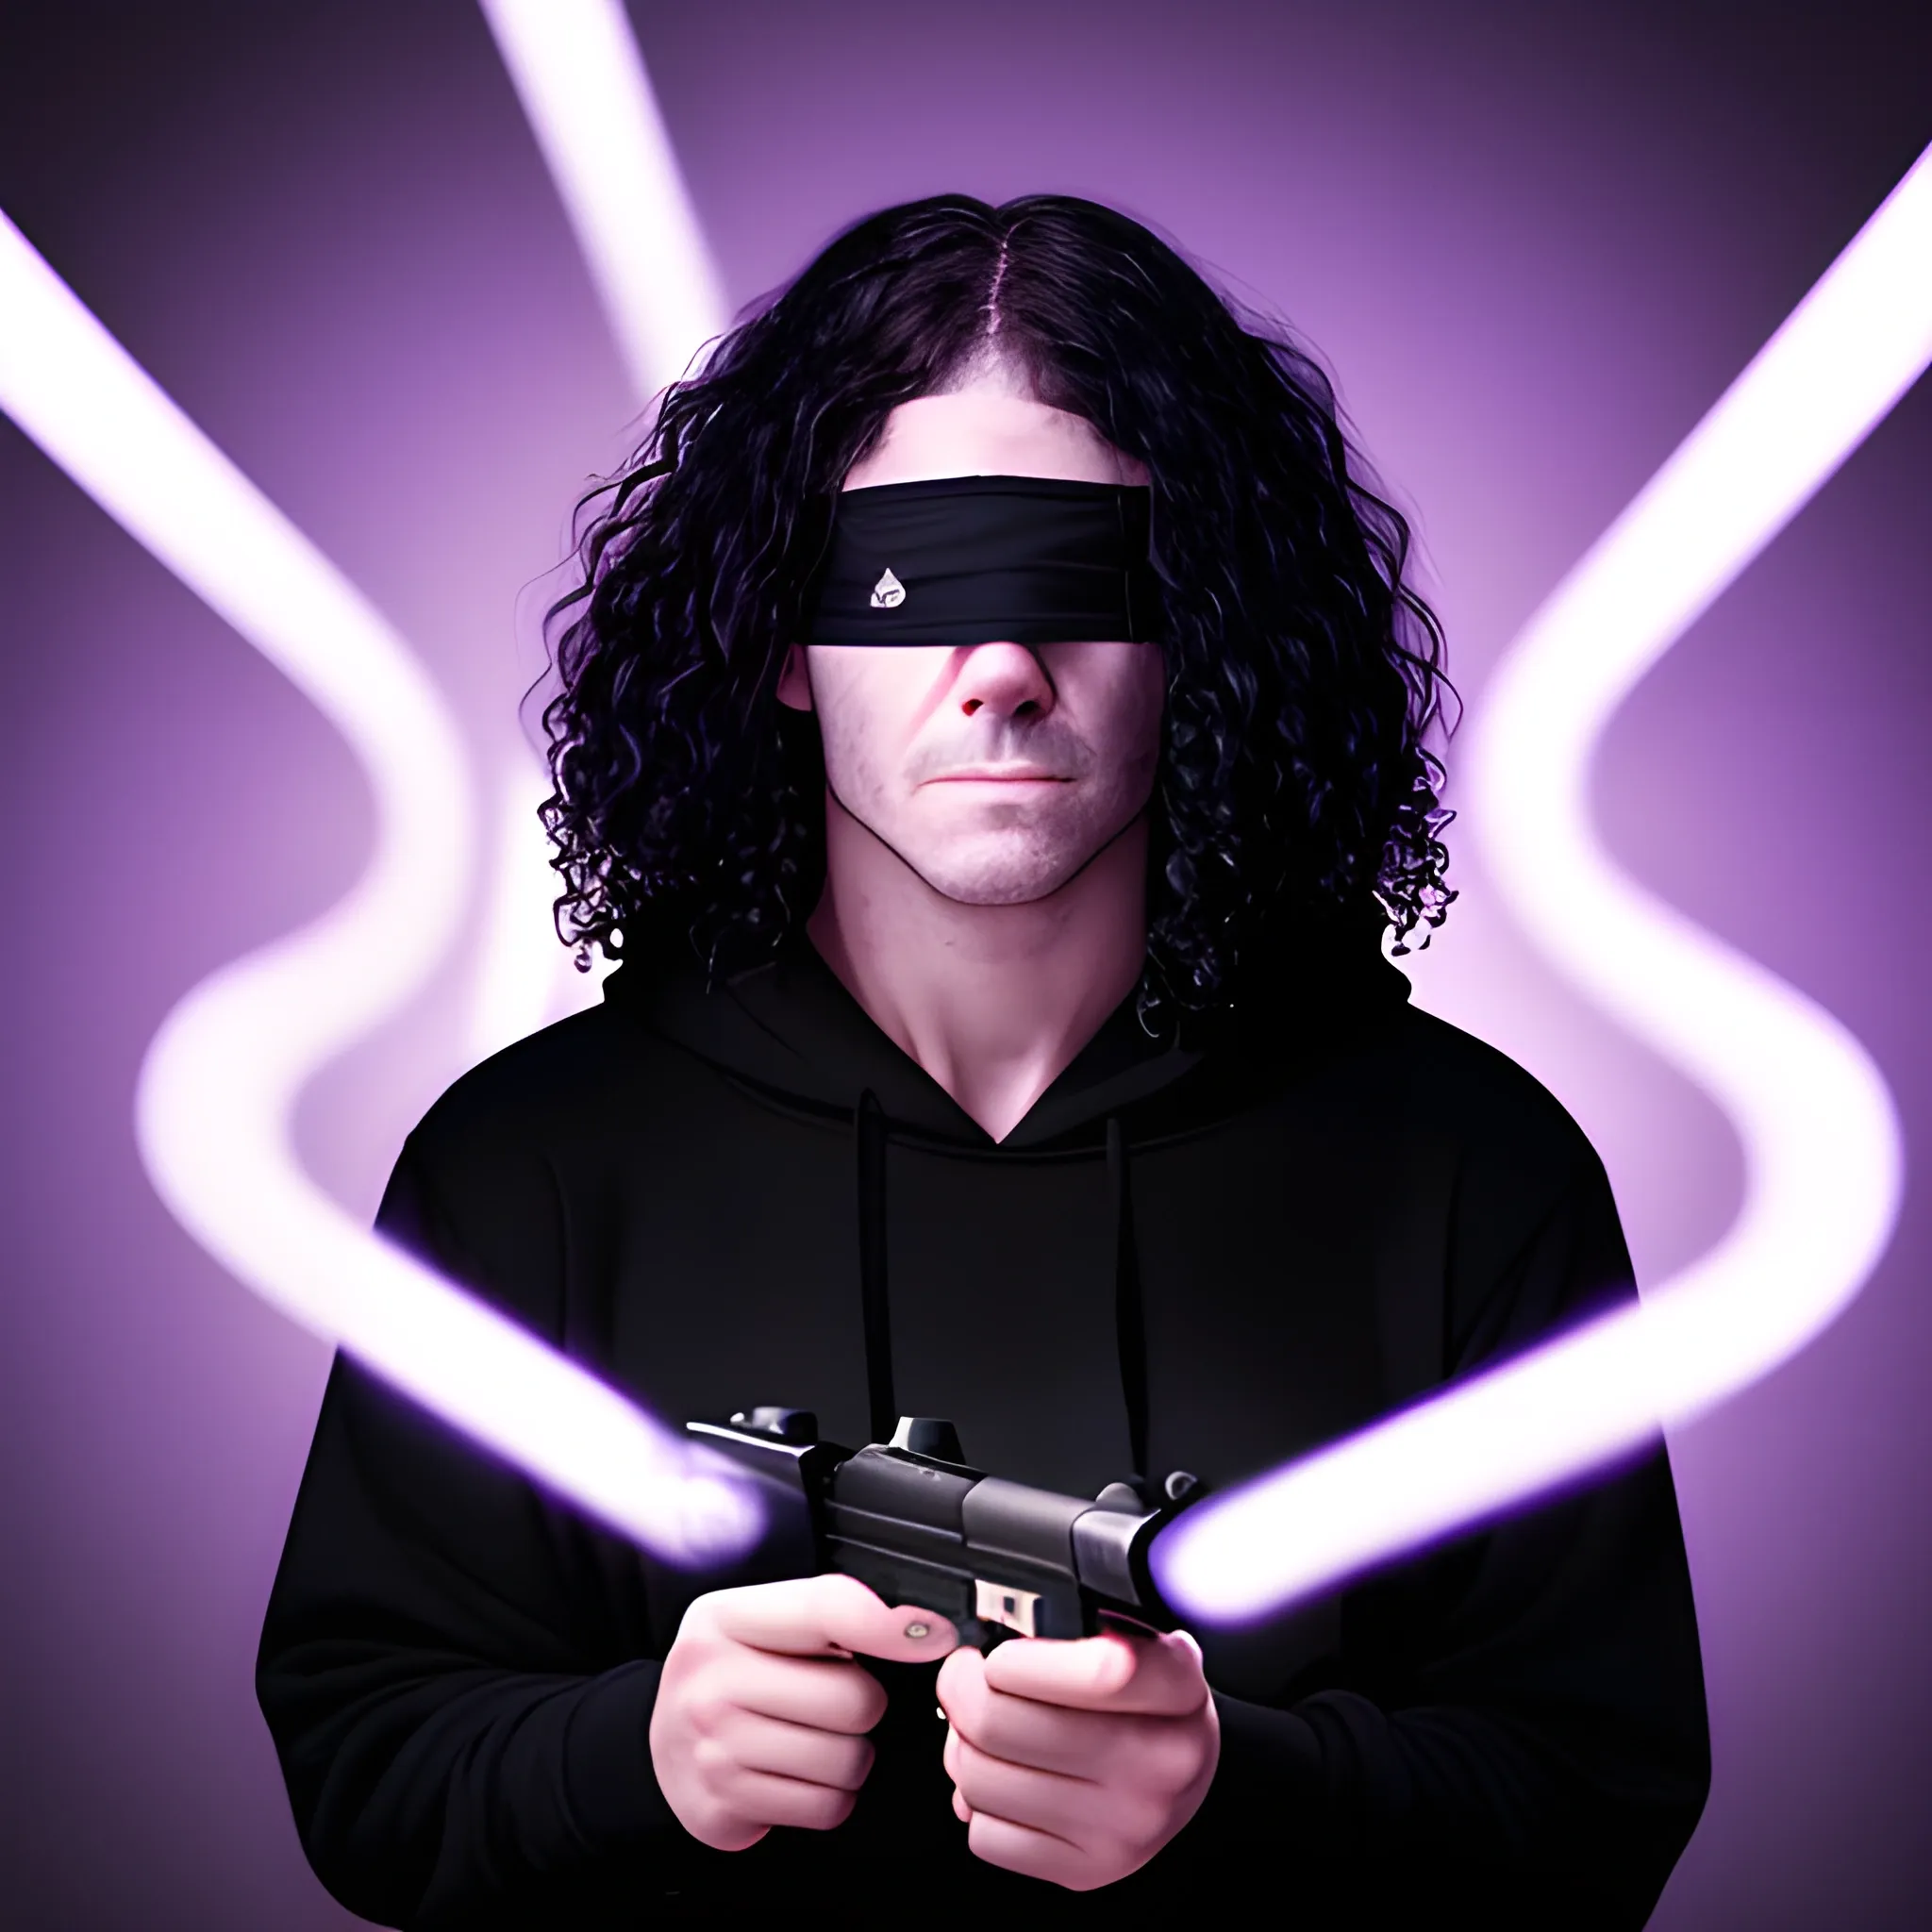 A white man with long black curly hair, with a black blindfold over only his eyes on, the rest of his face showing, a white hoodie, black shirt, and a look of fear and betrayal on his face, holding a gun. And a purple light from behind him